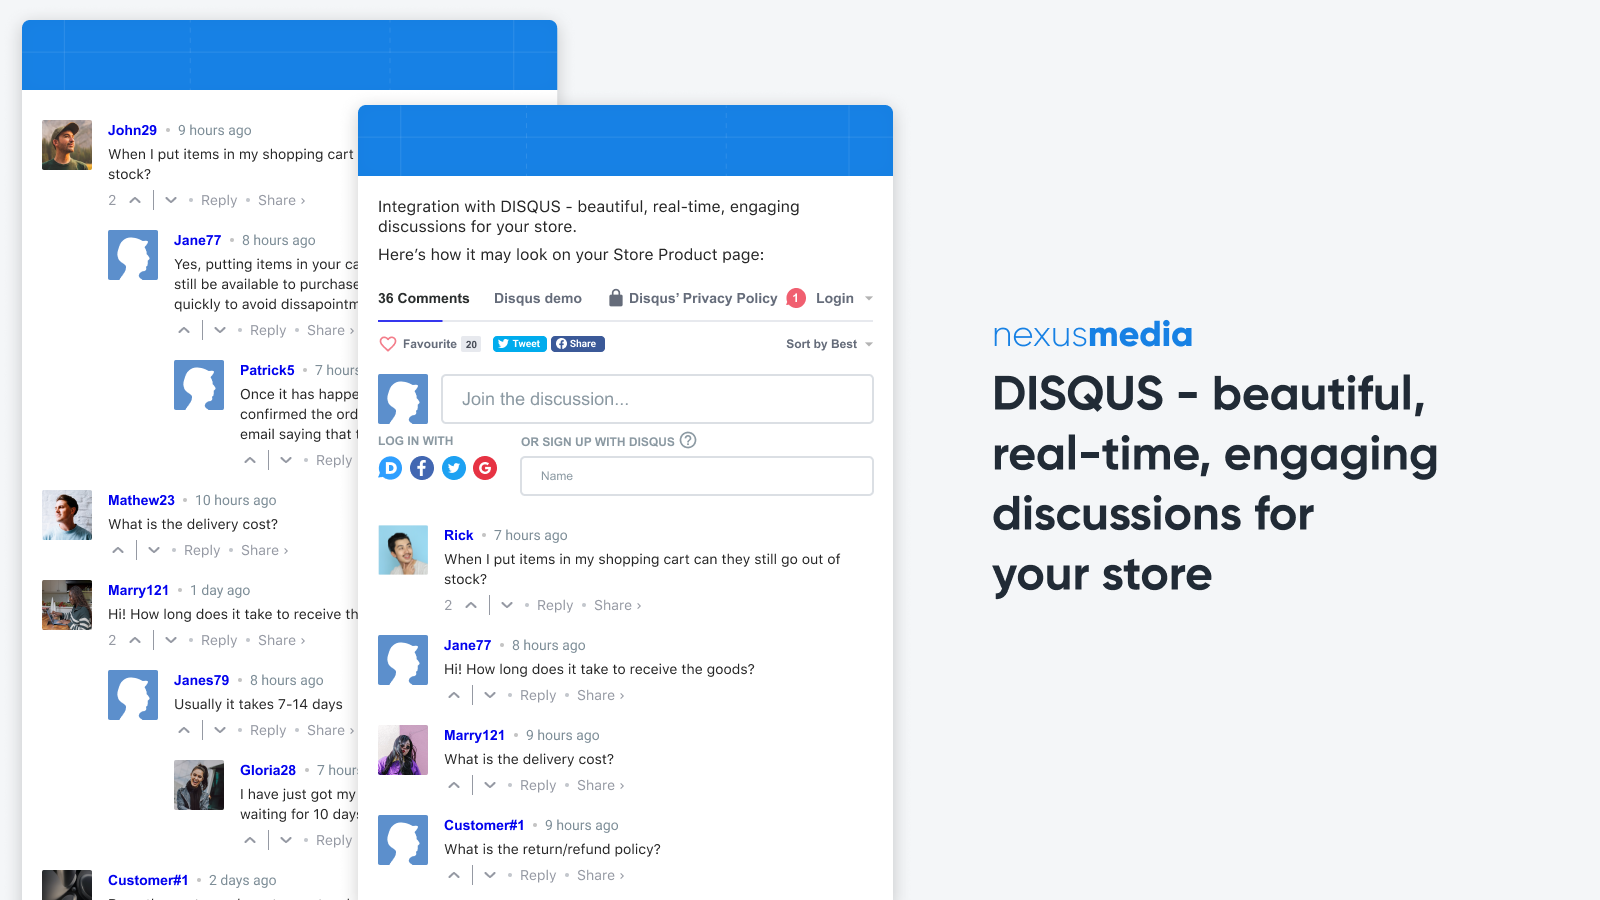 DISQUS - beautiful, real-time, engaging discussions